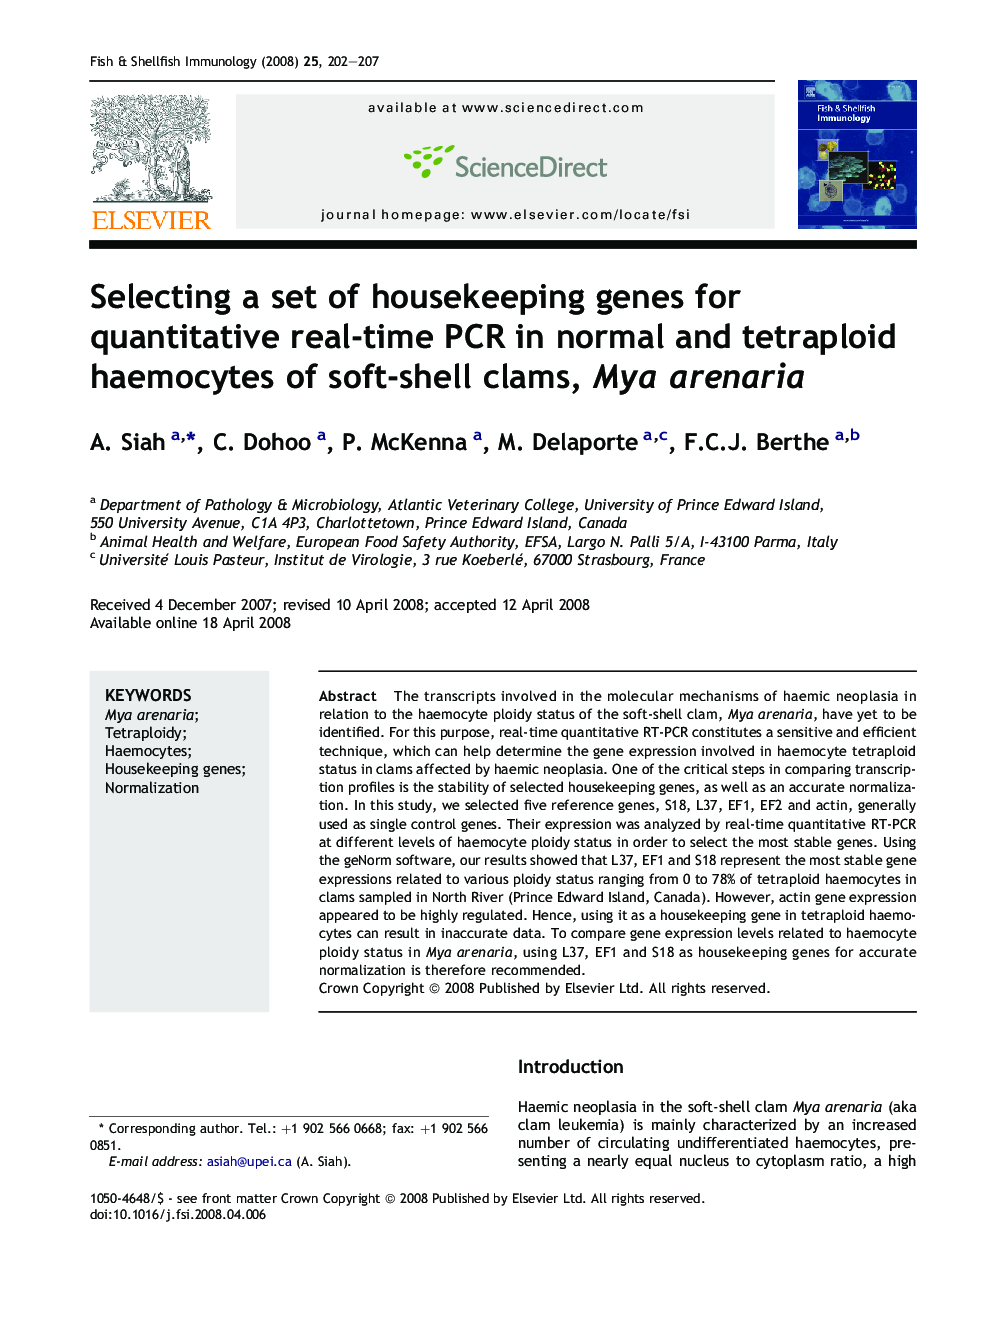 Selecting a set of housekeeping genes for quantitative real-time PCR in normal and tetraploid haemocytes of soft-shell clams, Mya arenaria